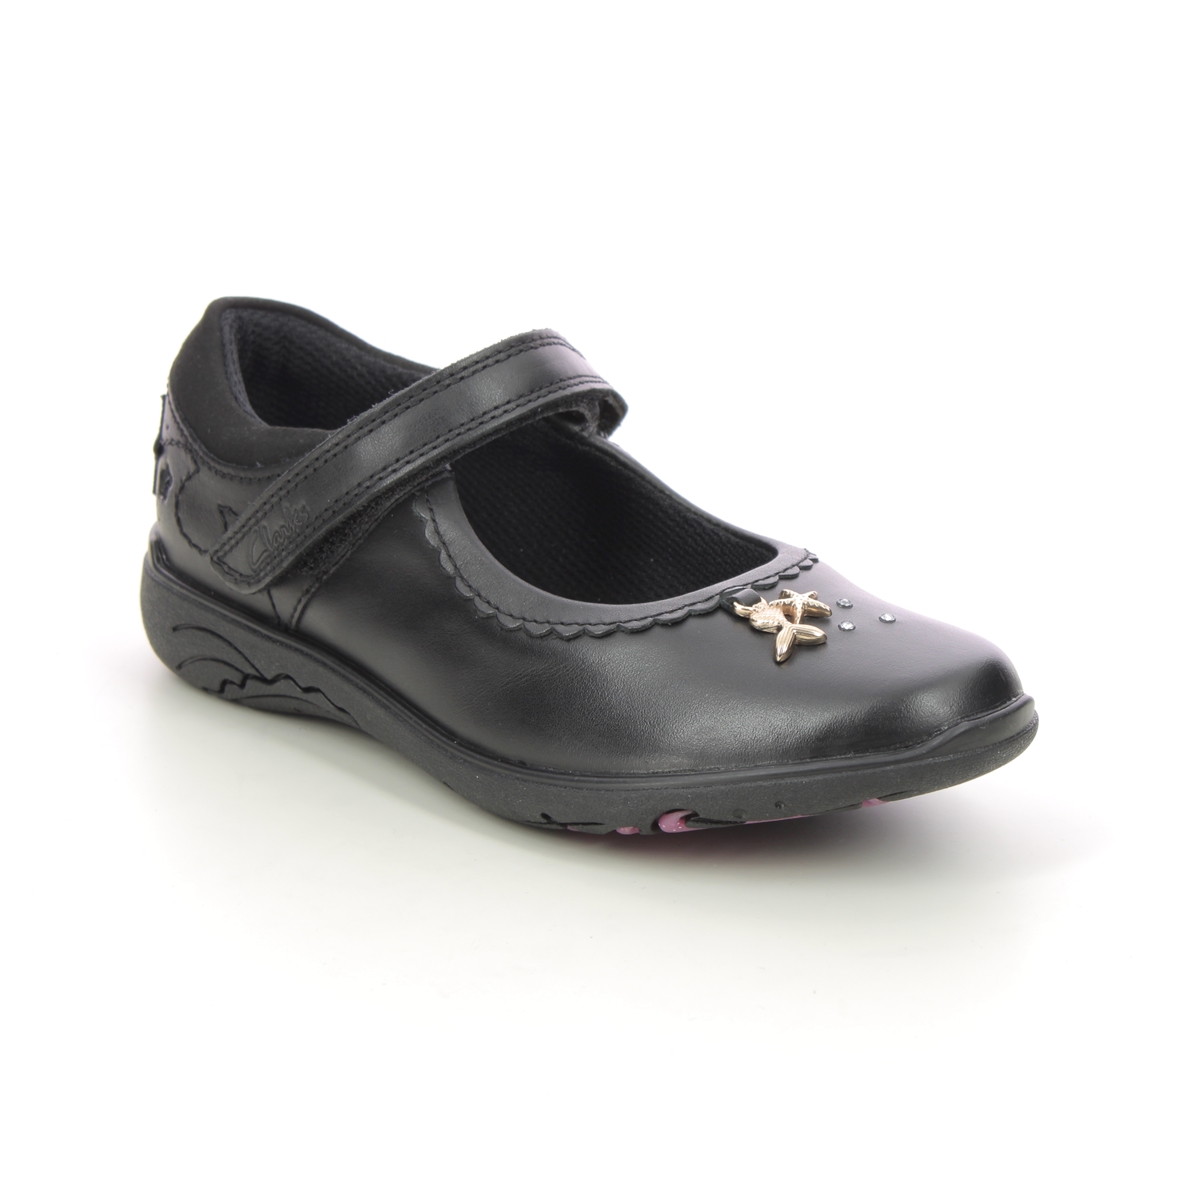 Clarks Relda Sea K Mary Jane Black Leather Kids Girls School Shoes 722407G In Size 12.5 In Plain Black Leather G Width Fitting For School For kids